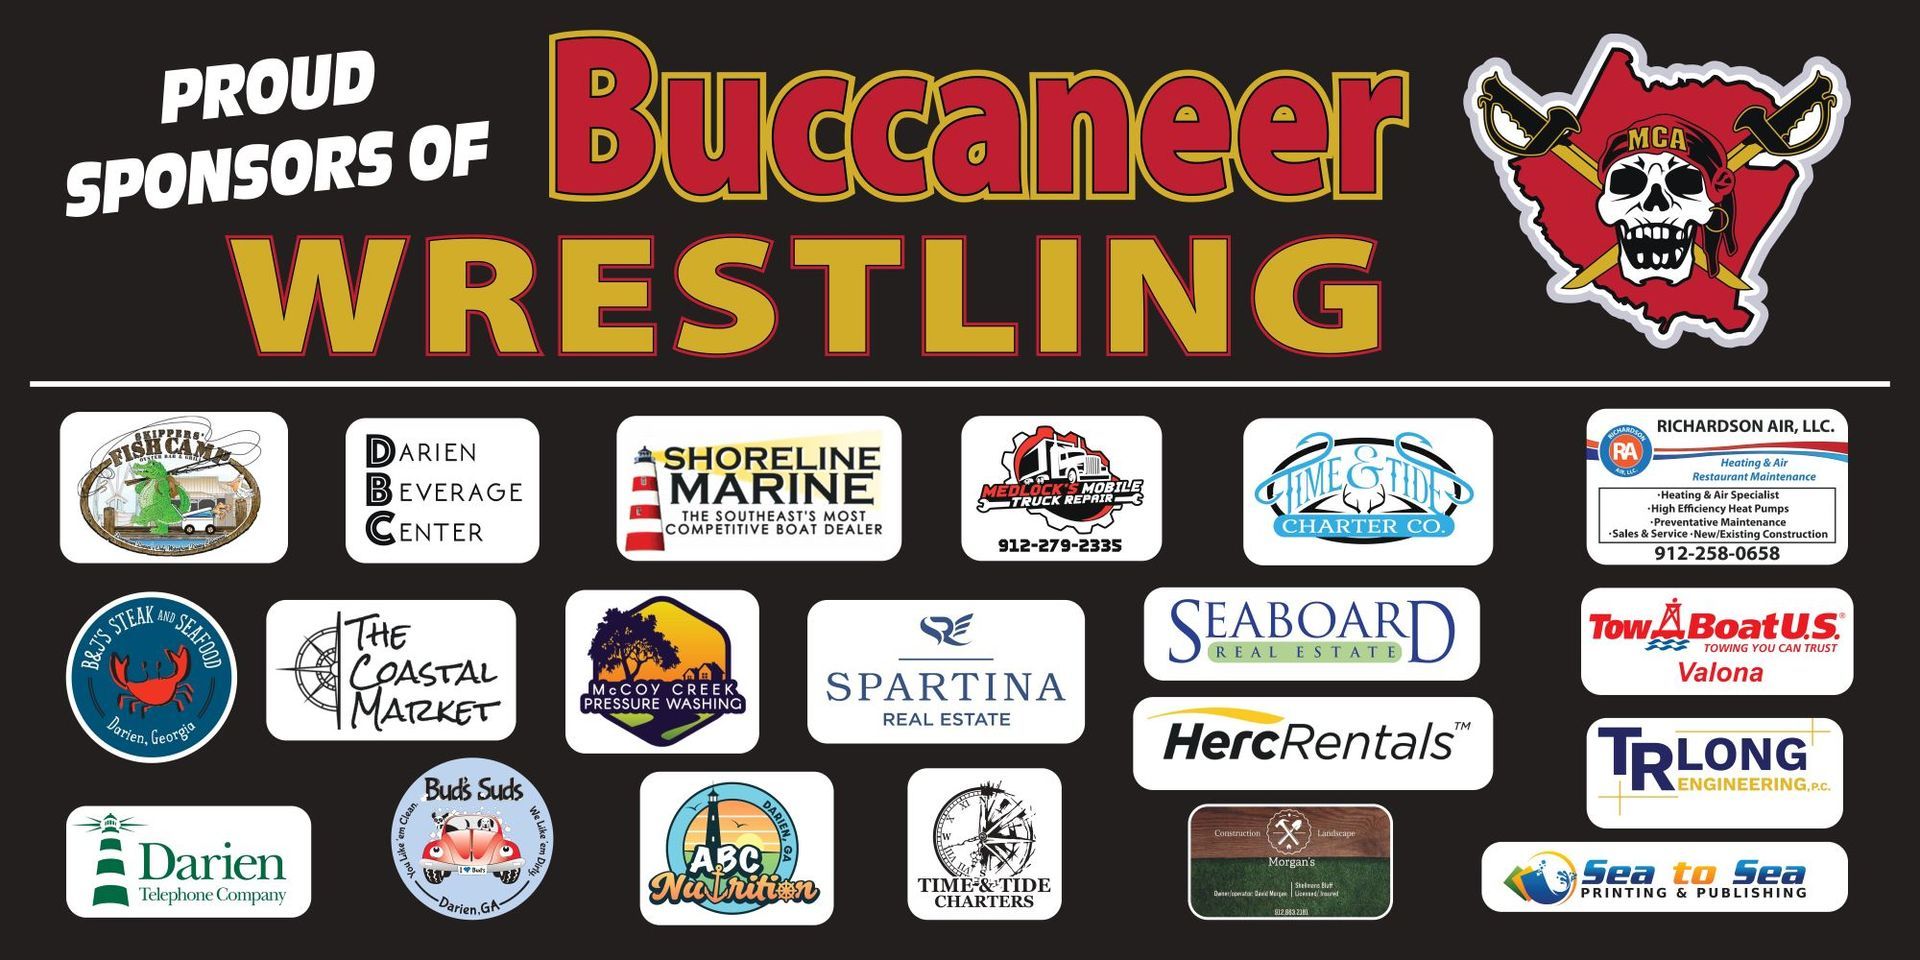 a poster for buccaneer wrestling with many logos on it